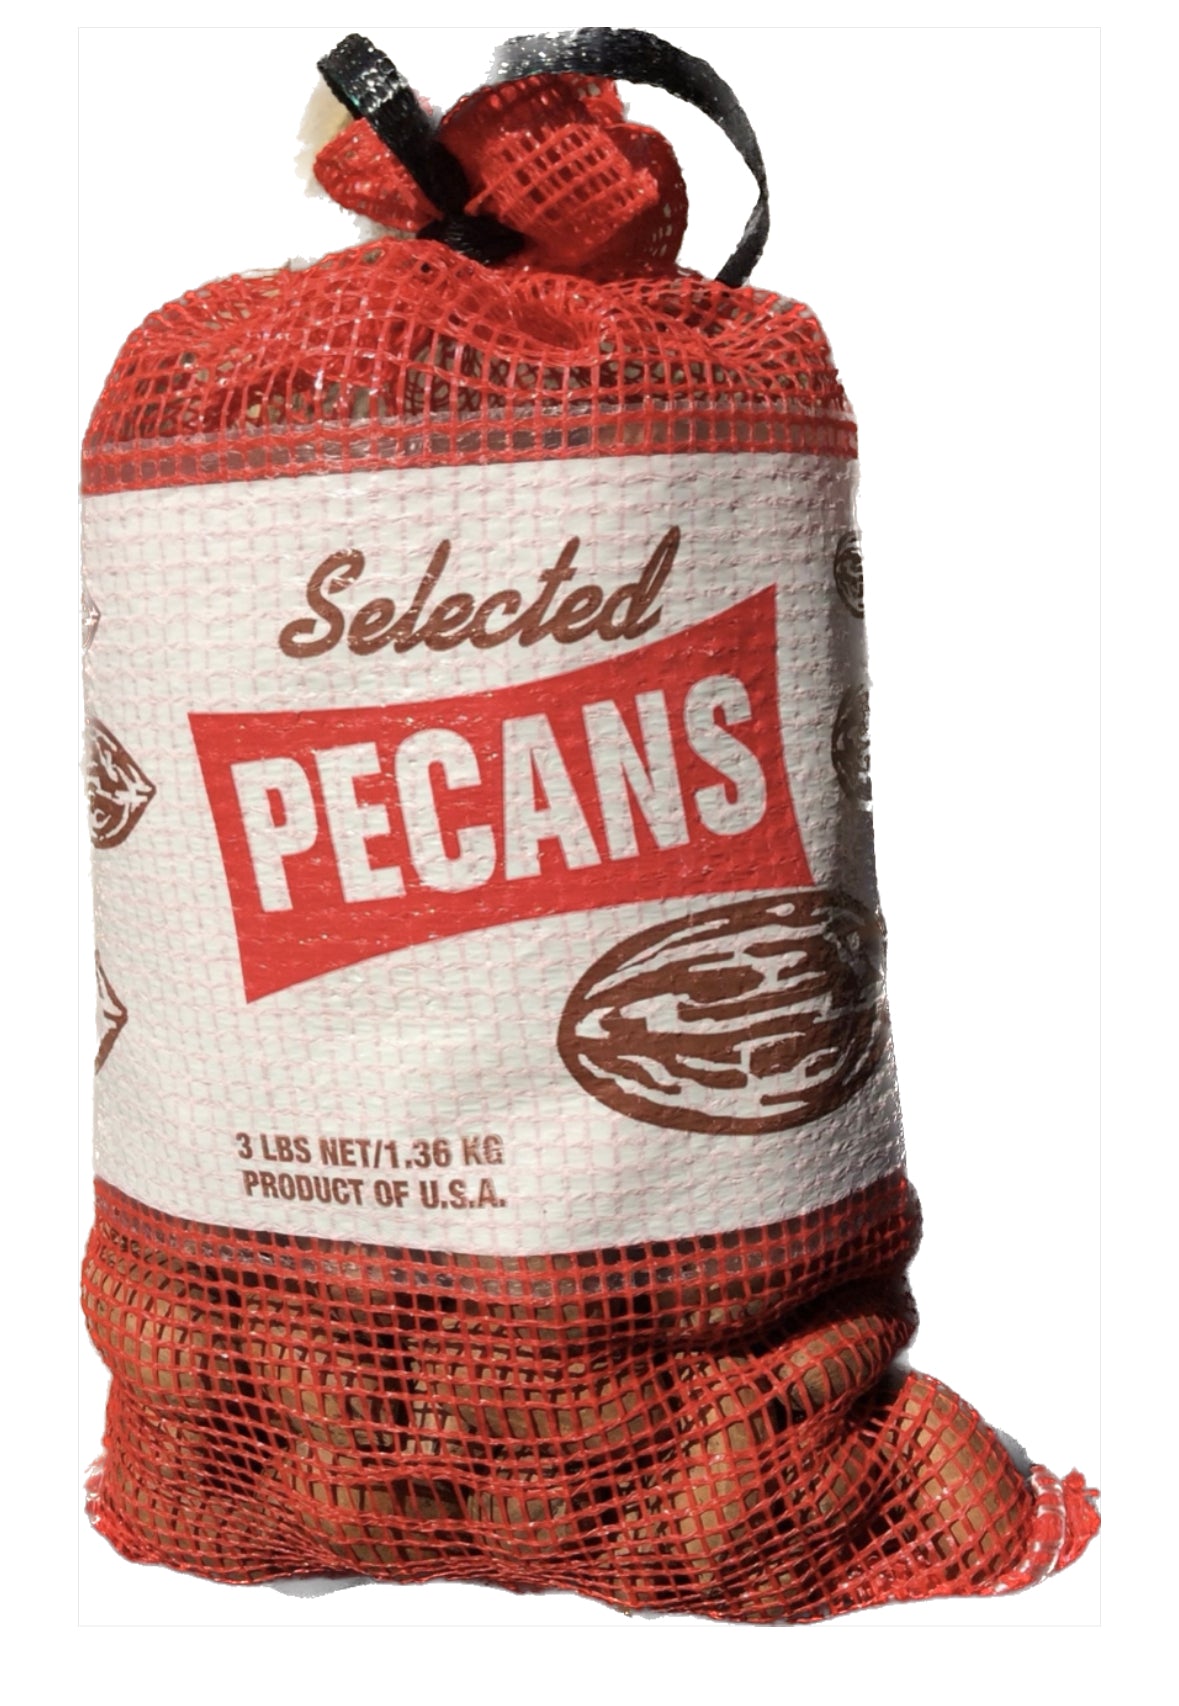 In-Shell Pecans 3 days guaranteed or next order 10% off